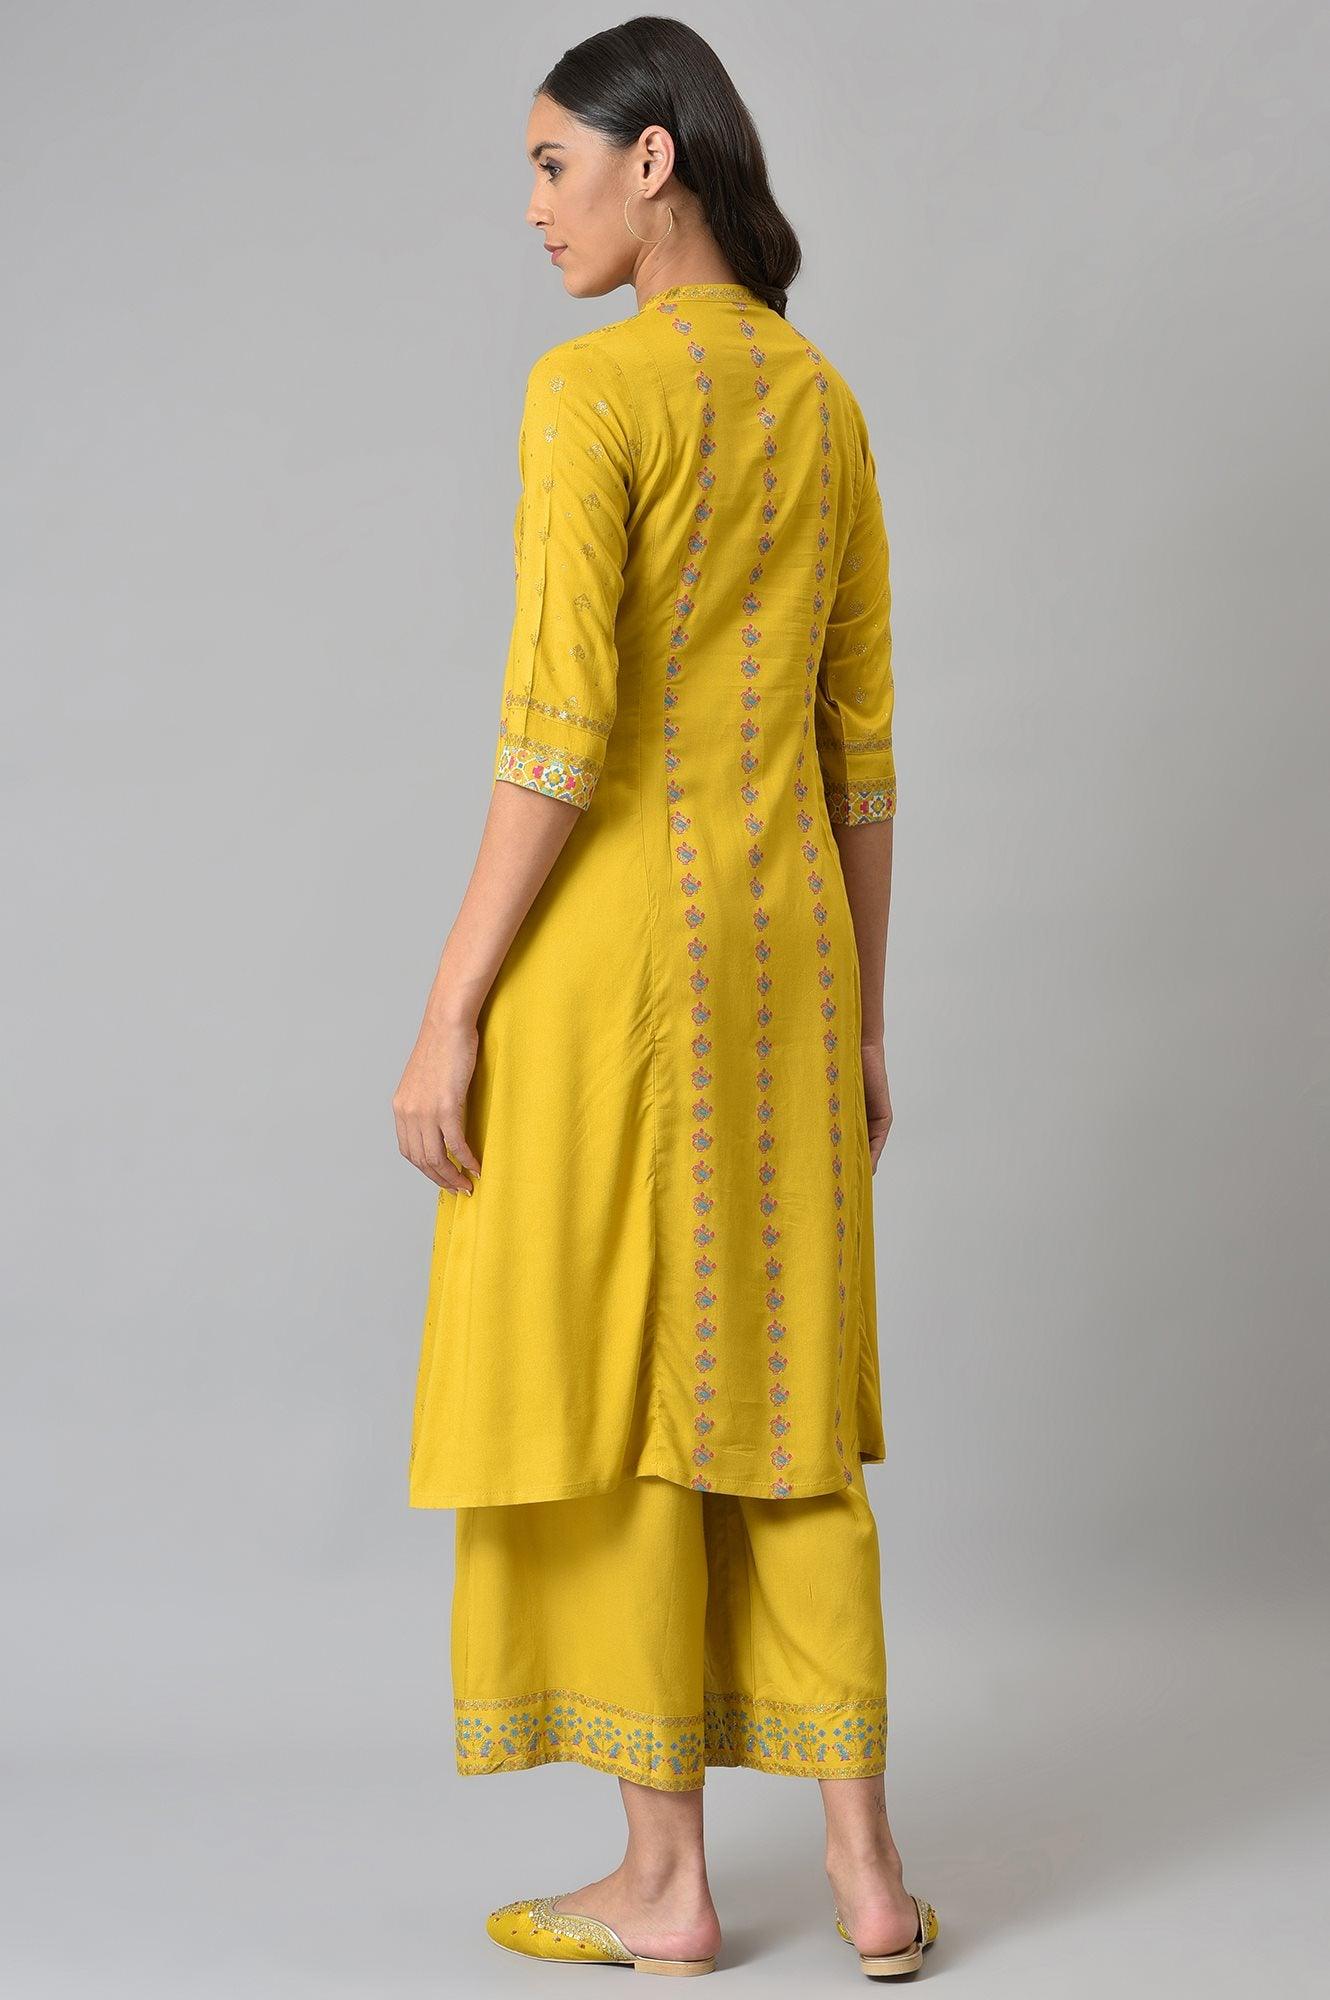 Dark Yellow Embroidered A-Line kurta With Printed Parallel Pants - wforwoman